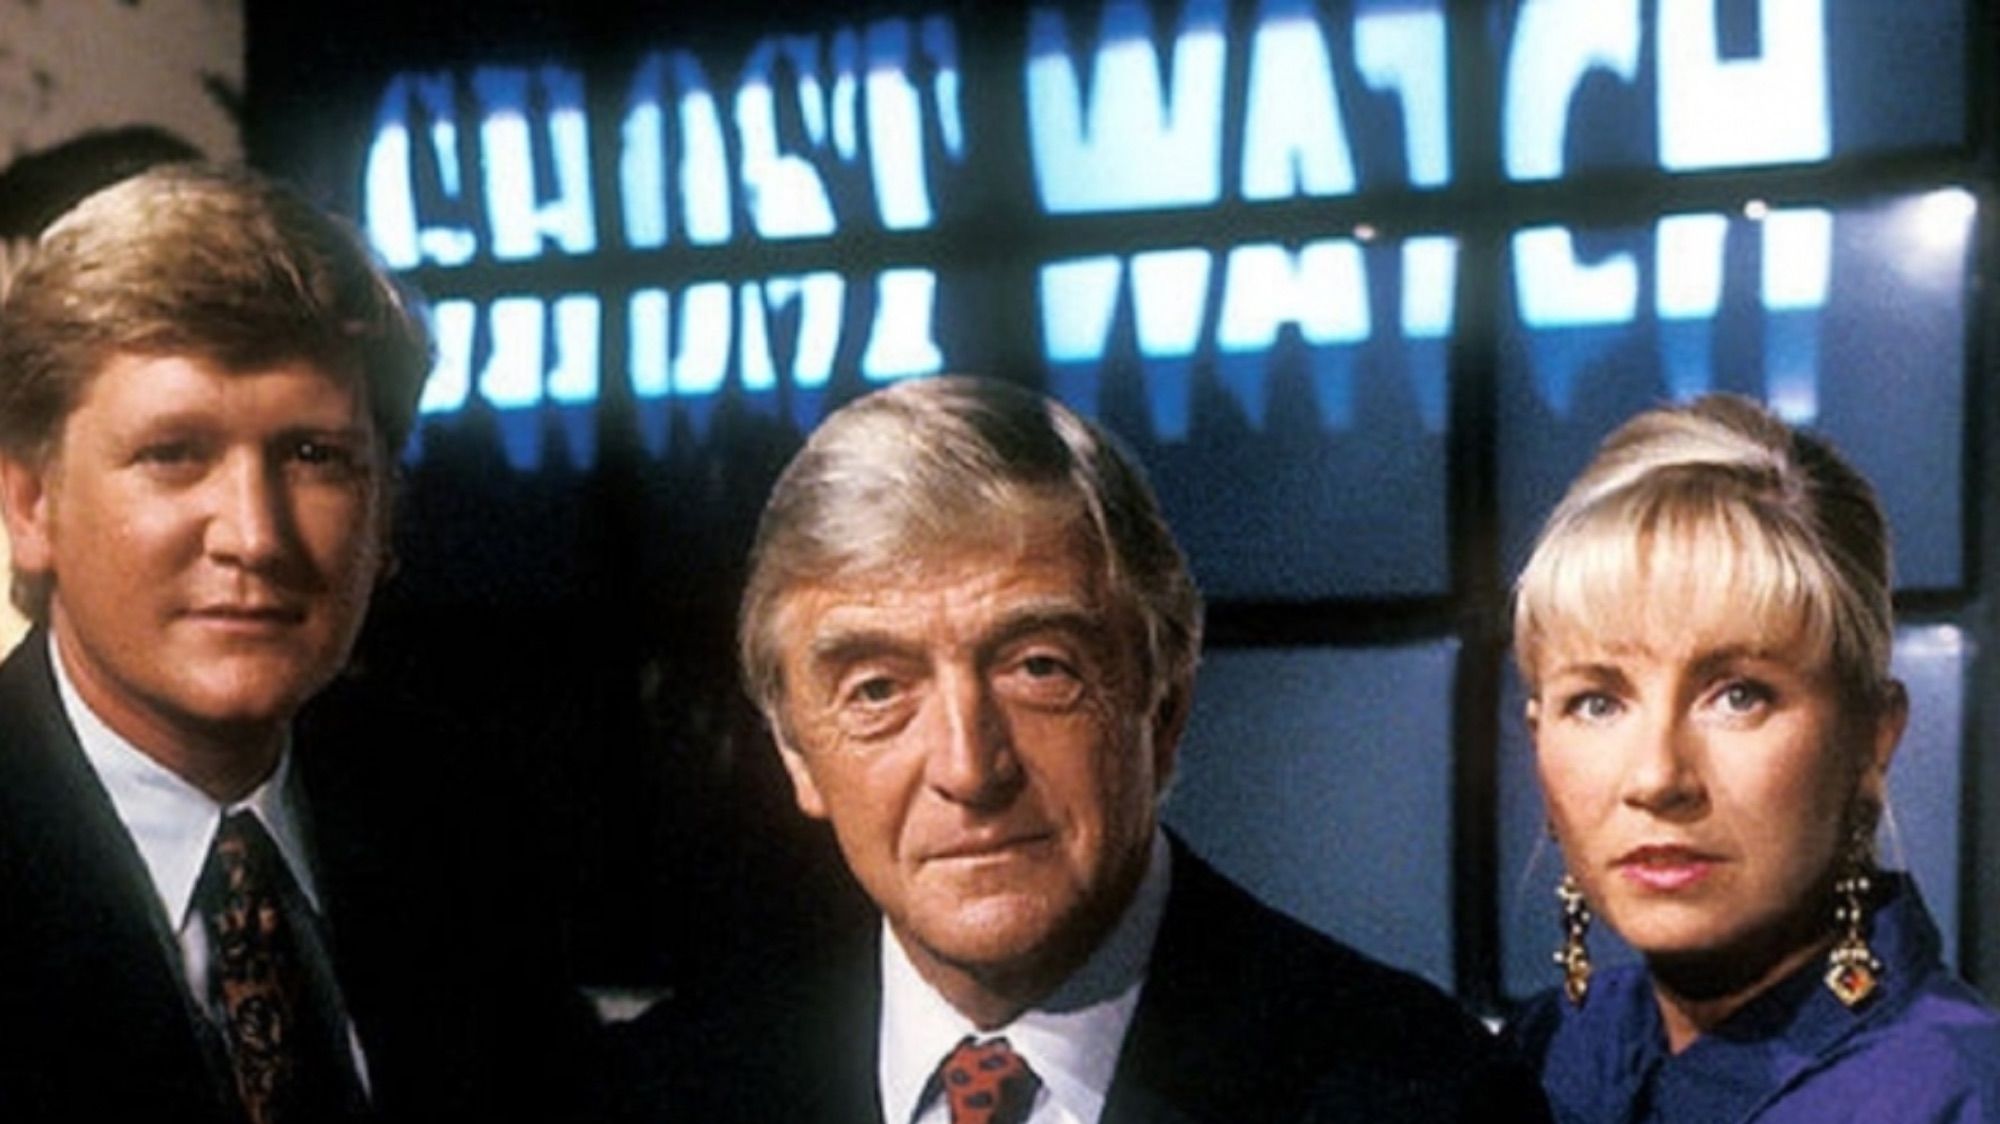 The three hosts of Ghostwatch